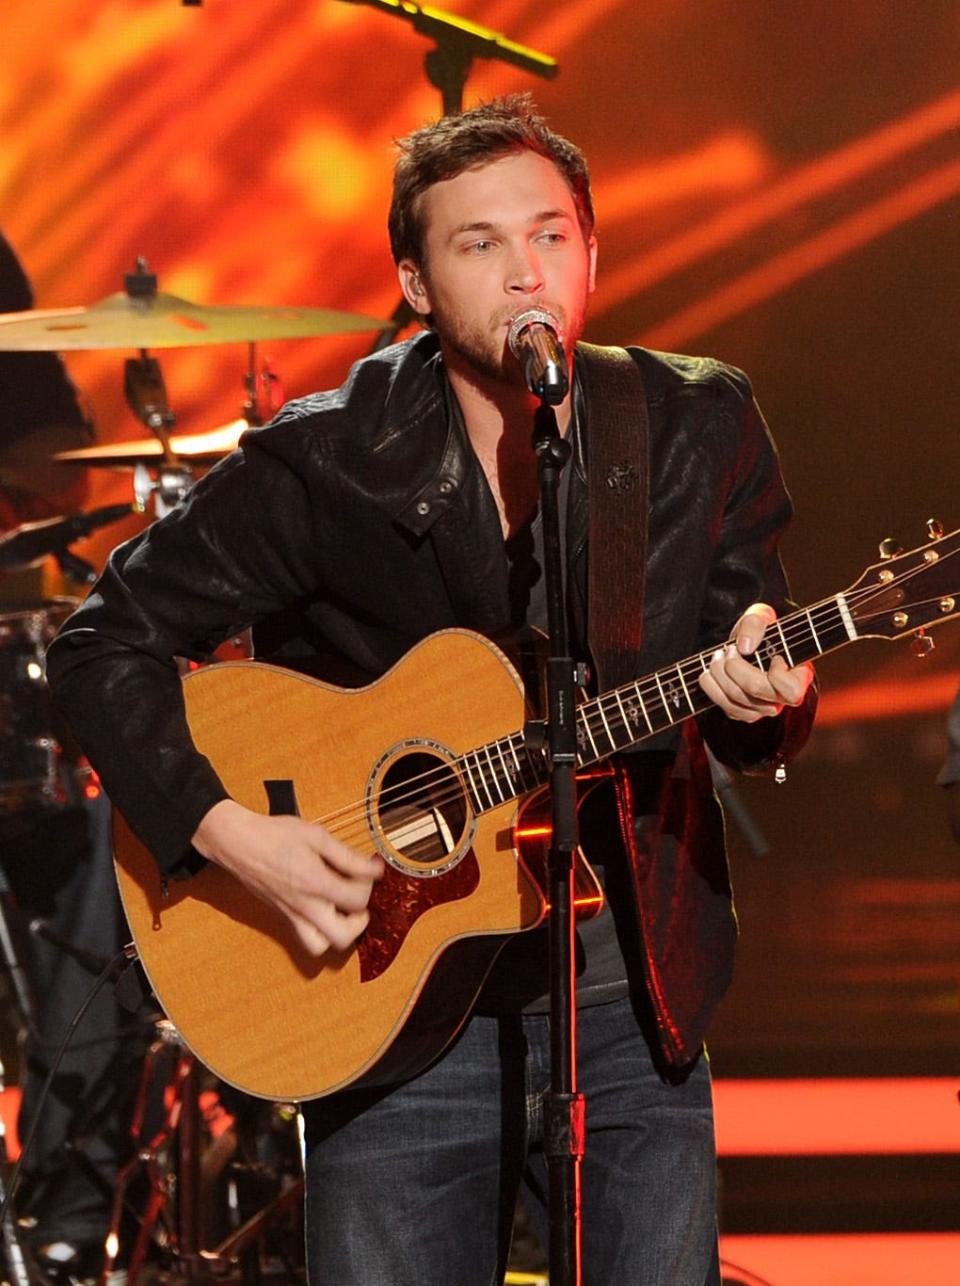 LOS ANGELES, CA - MAY 21: Musician Phillip Phillips performs onstage during Fox's "American Idol" XIII Finale at Nokia Theatre L.A. Live on May 21, 2014 in Los Angeles, California. (Photo by Kevin Winter/Getty Images)